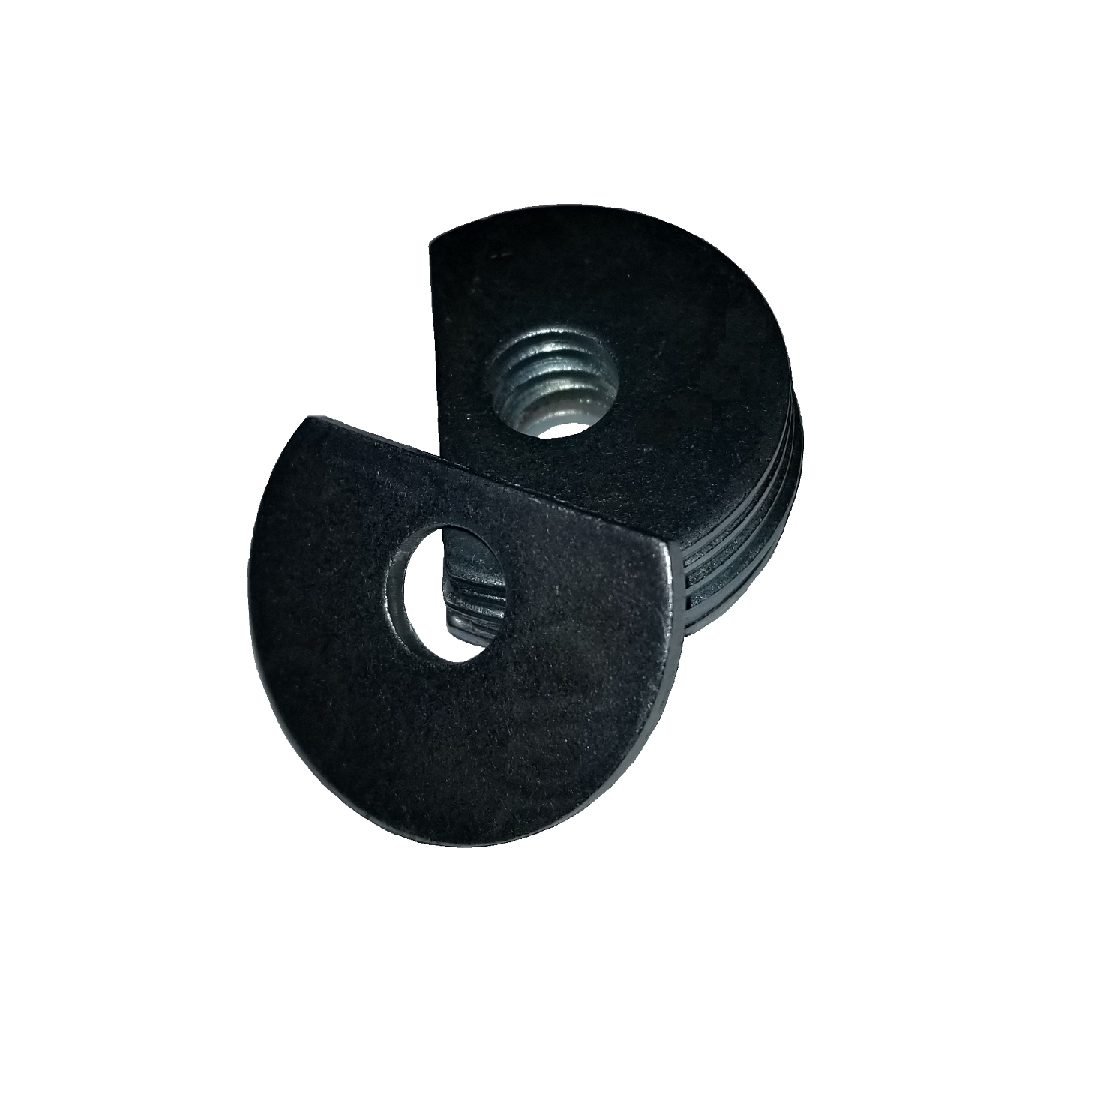 Clipped OD Washer - 0.406 ID, 1.500 OD, 0.062 Thick, Low Carbon Steel - Soft, Zinc & Clear